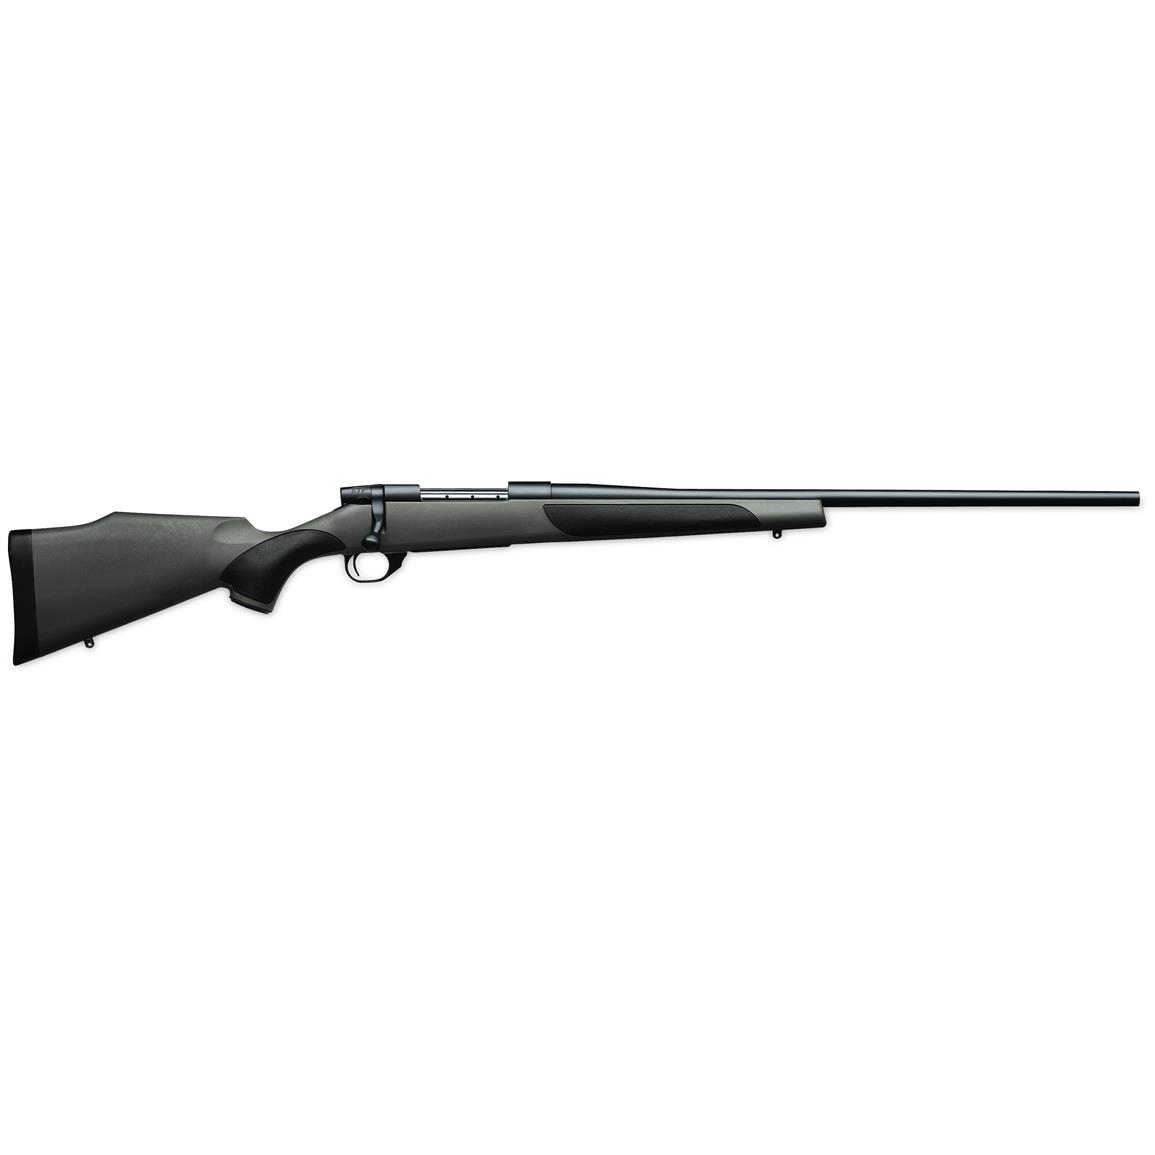 Weatherby Vanguard 2 Synthetic, Bolt Action, .308 Winchester, 24" Barrel, 5+1 Rounds